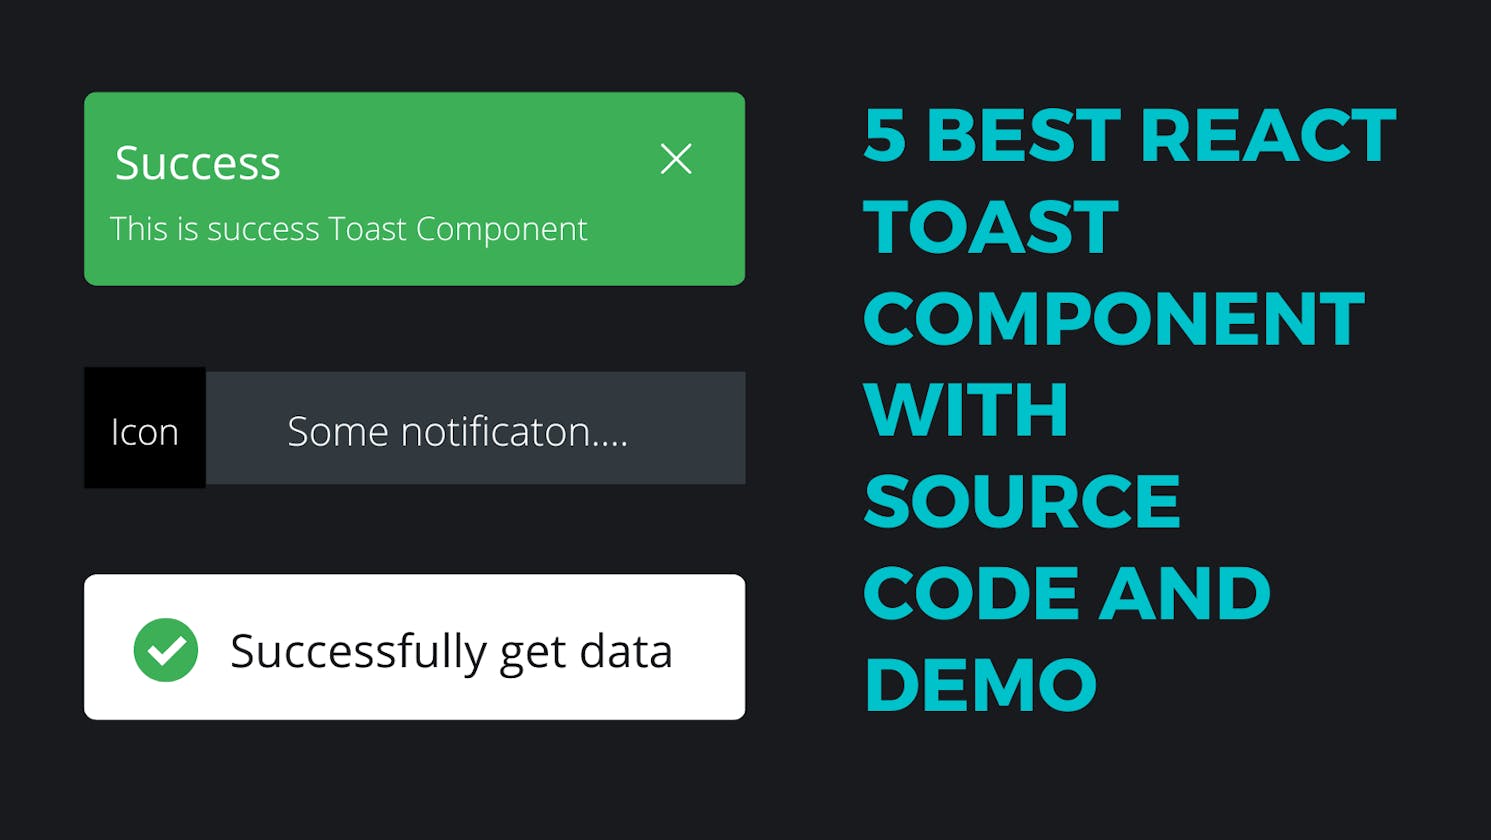 5 Best React Toast Component with Source Code and Demo